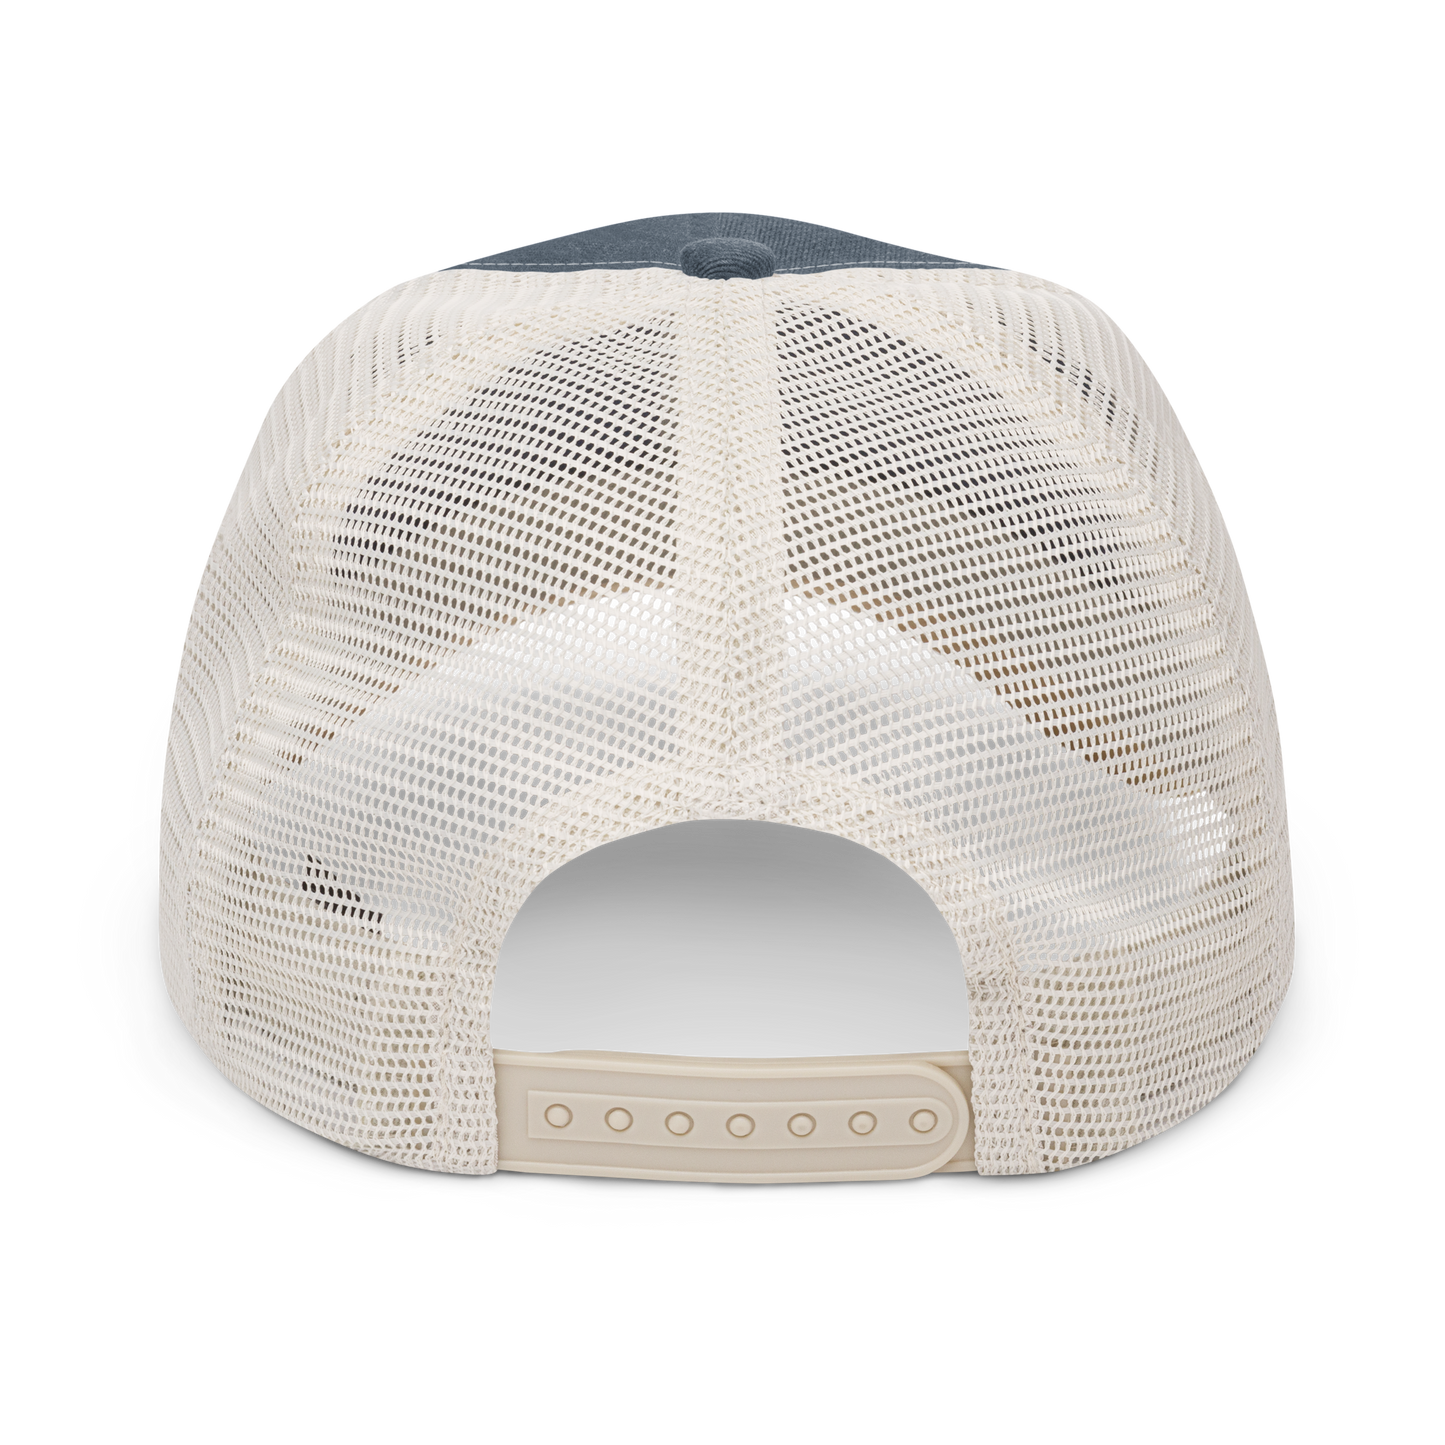 YHM Designs - YQG Windsor Pigment-Dyed Trucker Cap - Crossed-X Design with Airport Code and Vintage Propliner - White Embroidery - Image 17